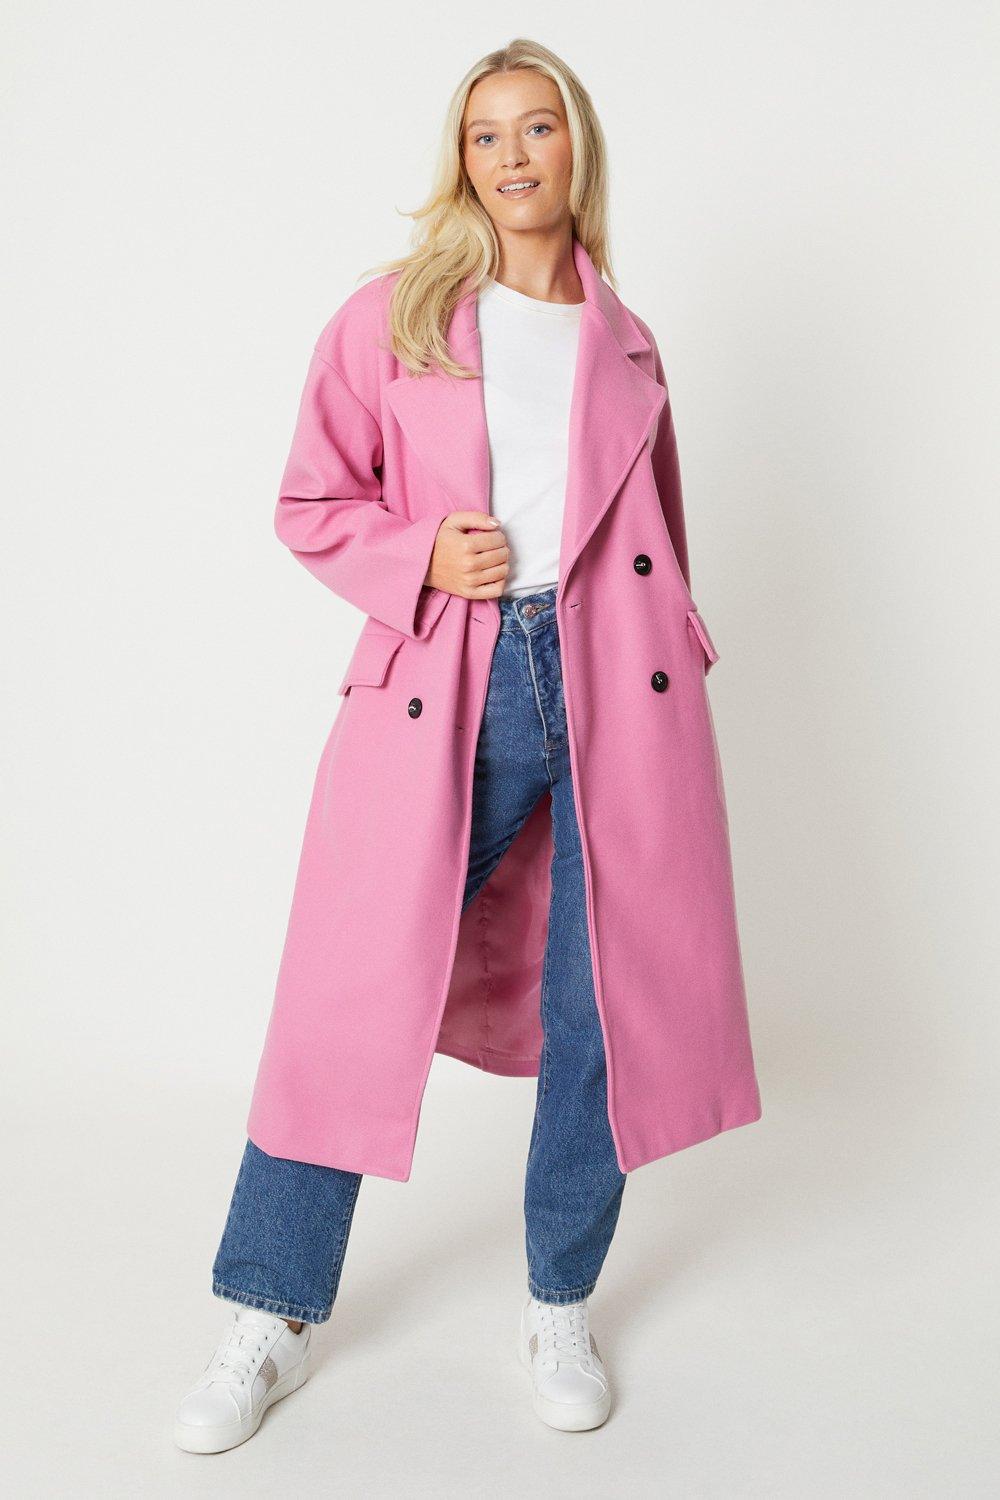 Women’s Double Breasted Wool Look Coat - pink - L